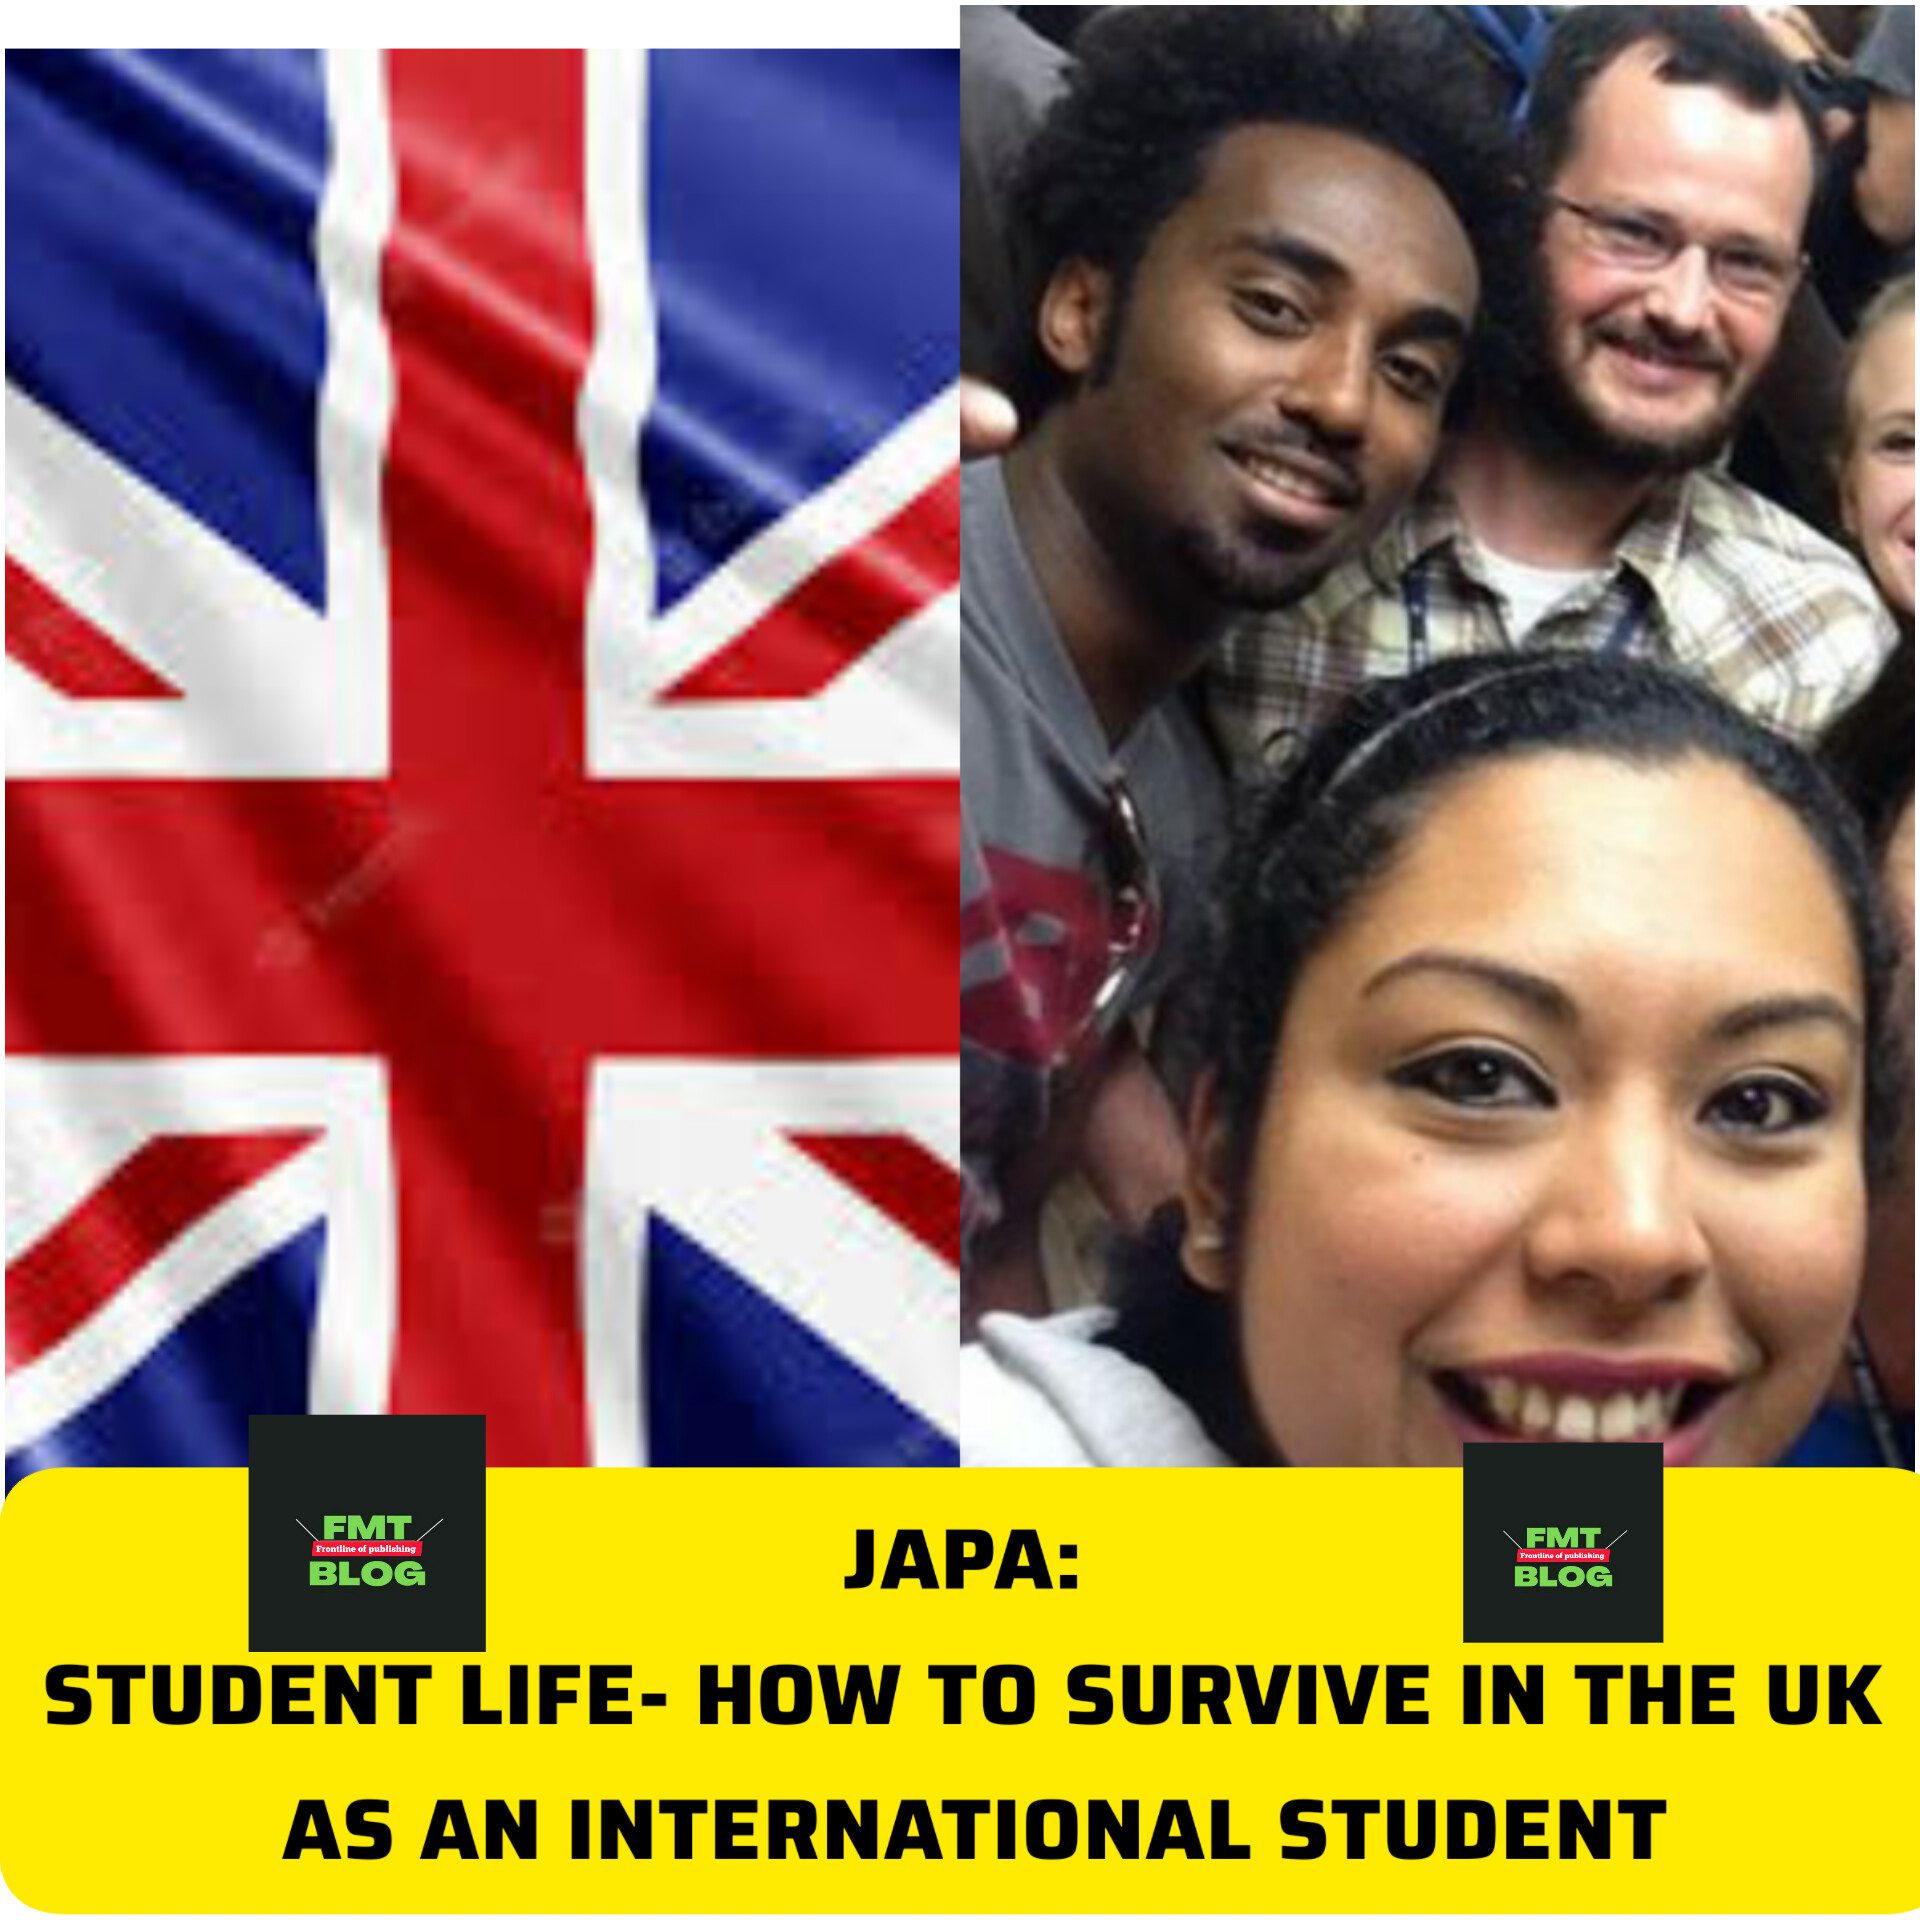 STUDENT LIFE: HOW TO SURVIVE IN THE UK AS AN INTERNATIONAL STUDENT